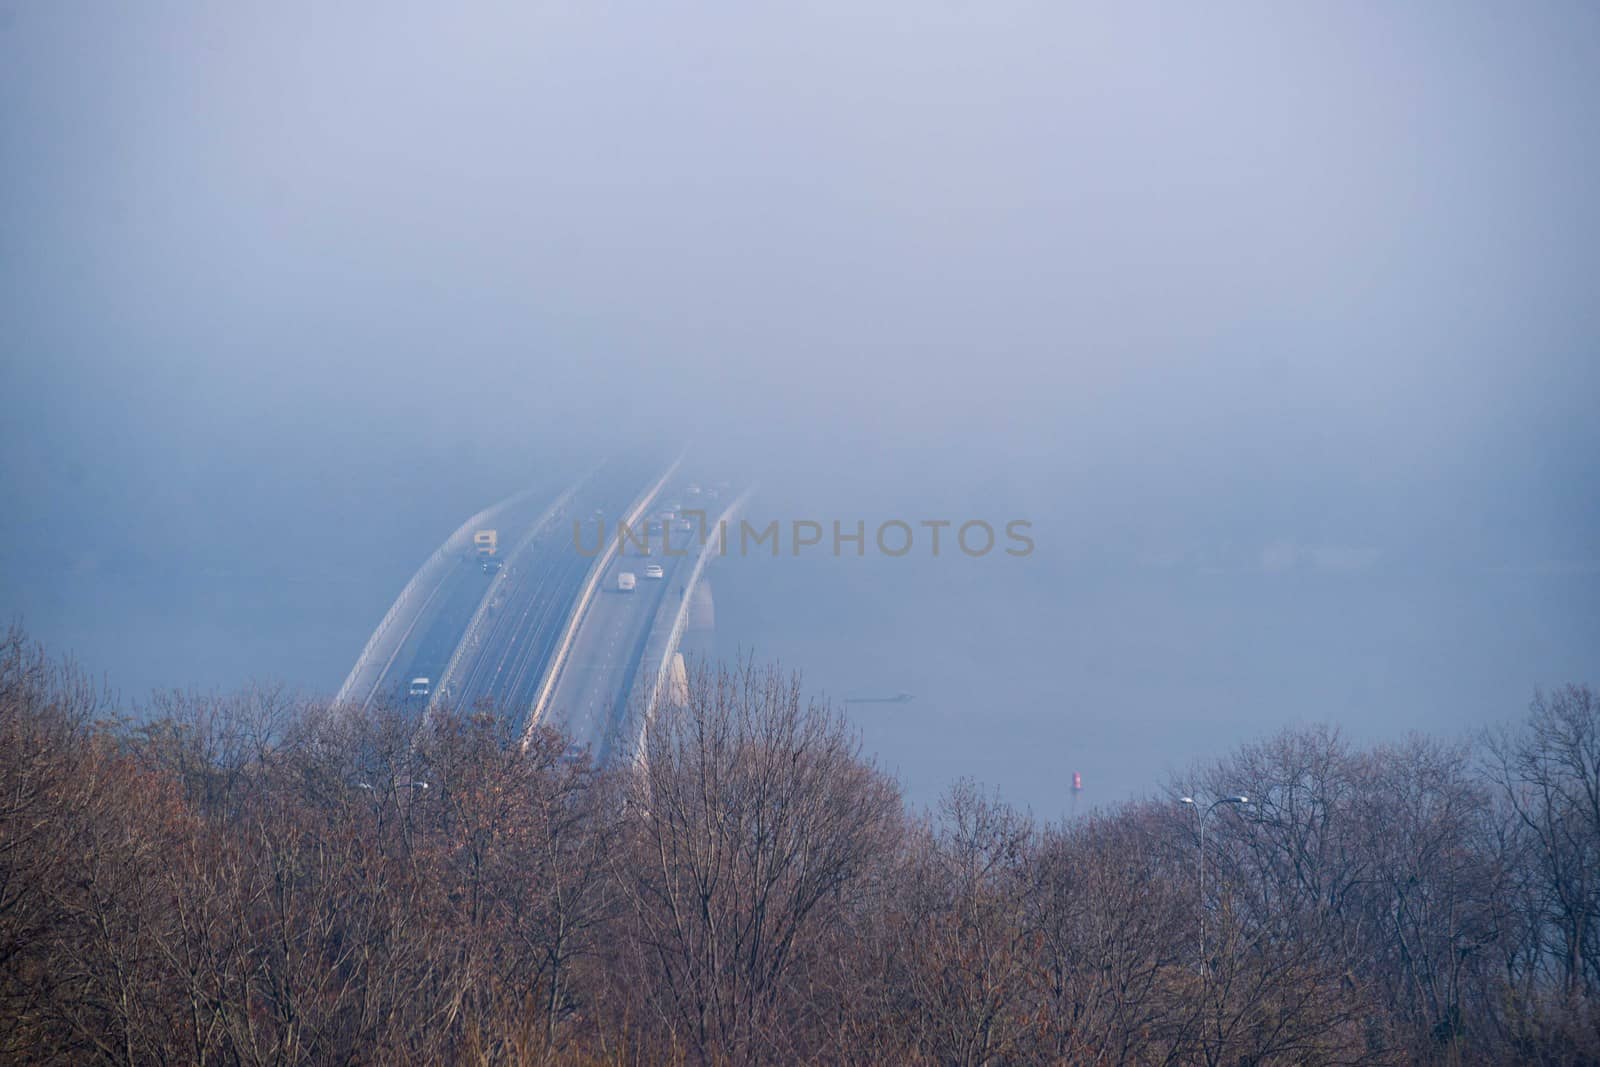 Autumn fog and river steel bridge with subway train on blurred background. Forest in foreground.